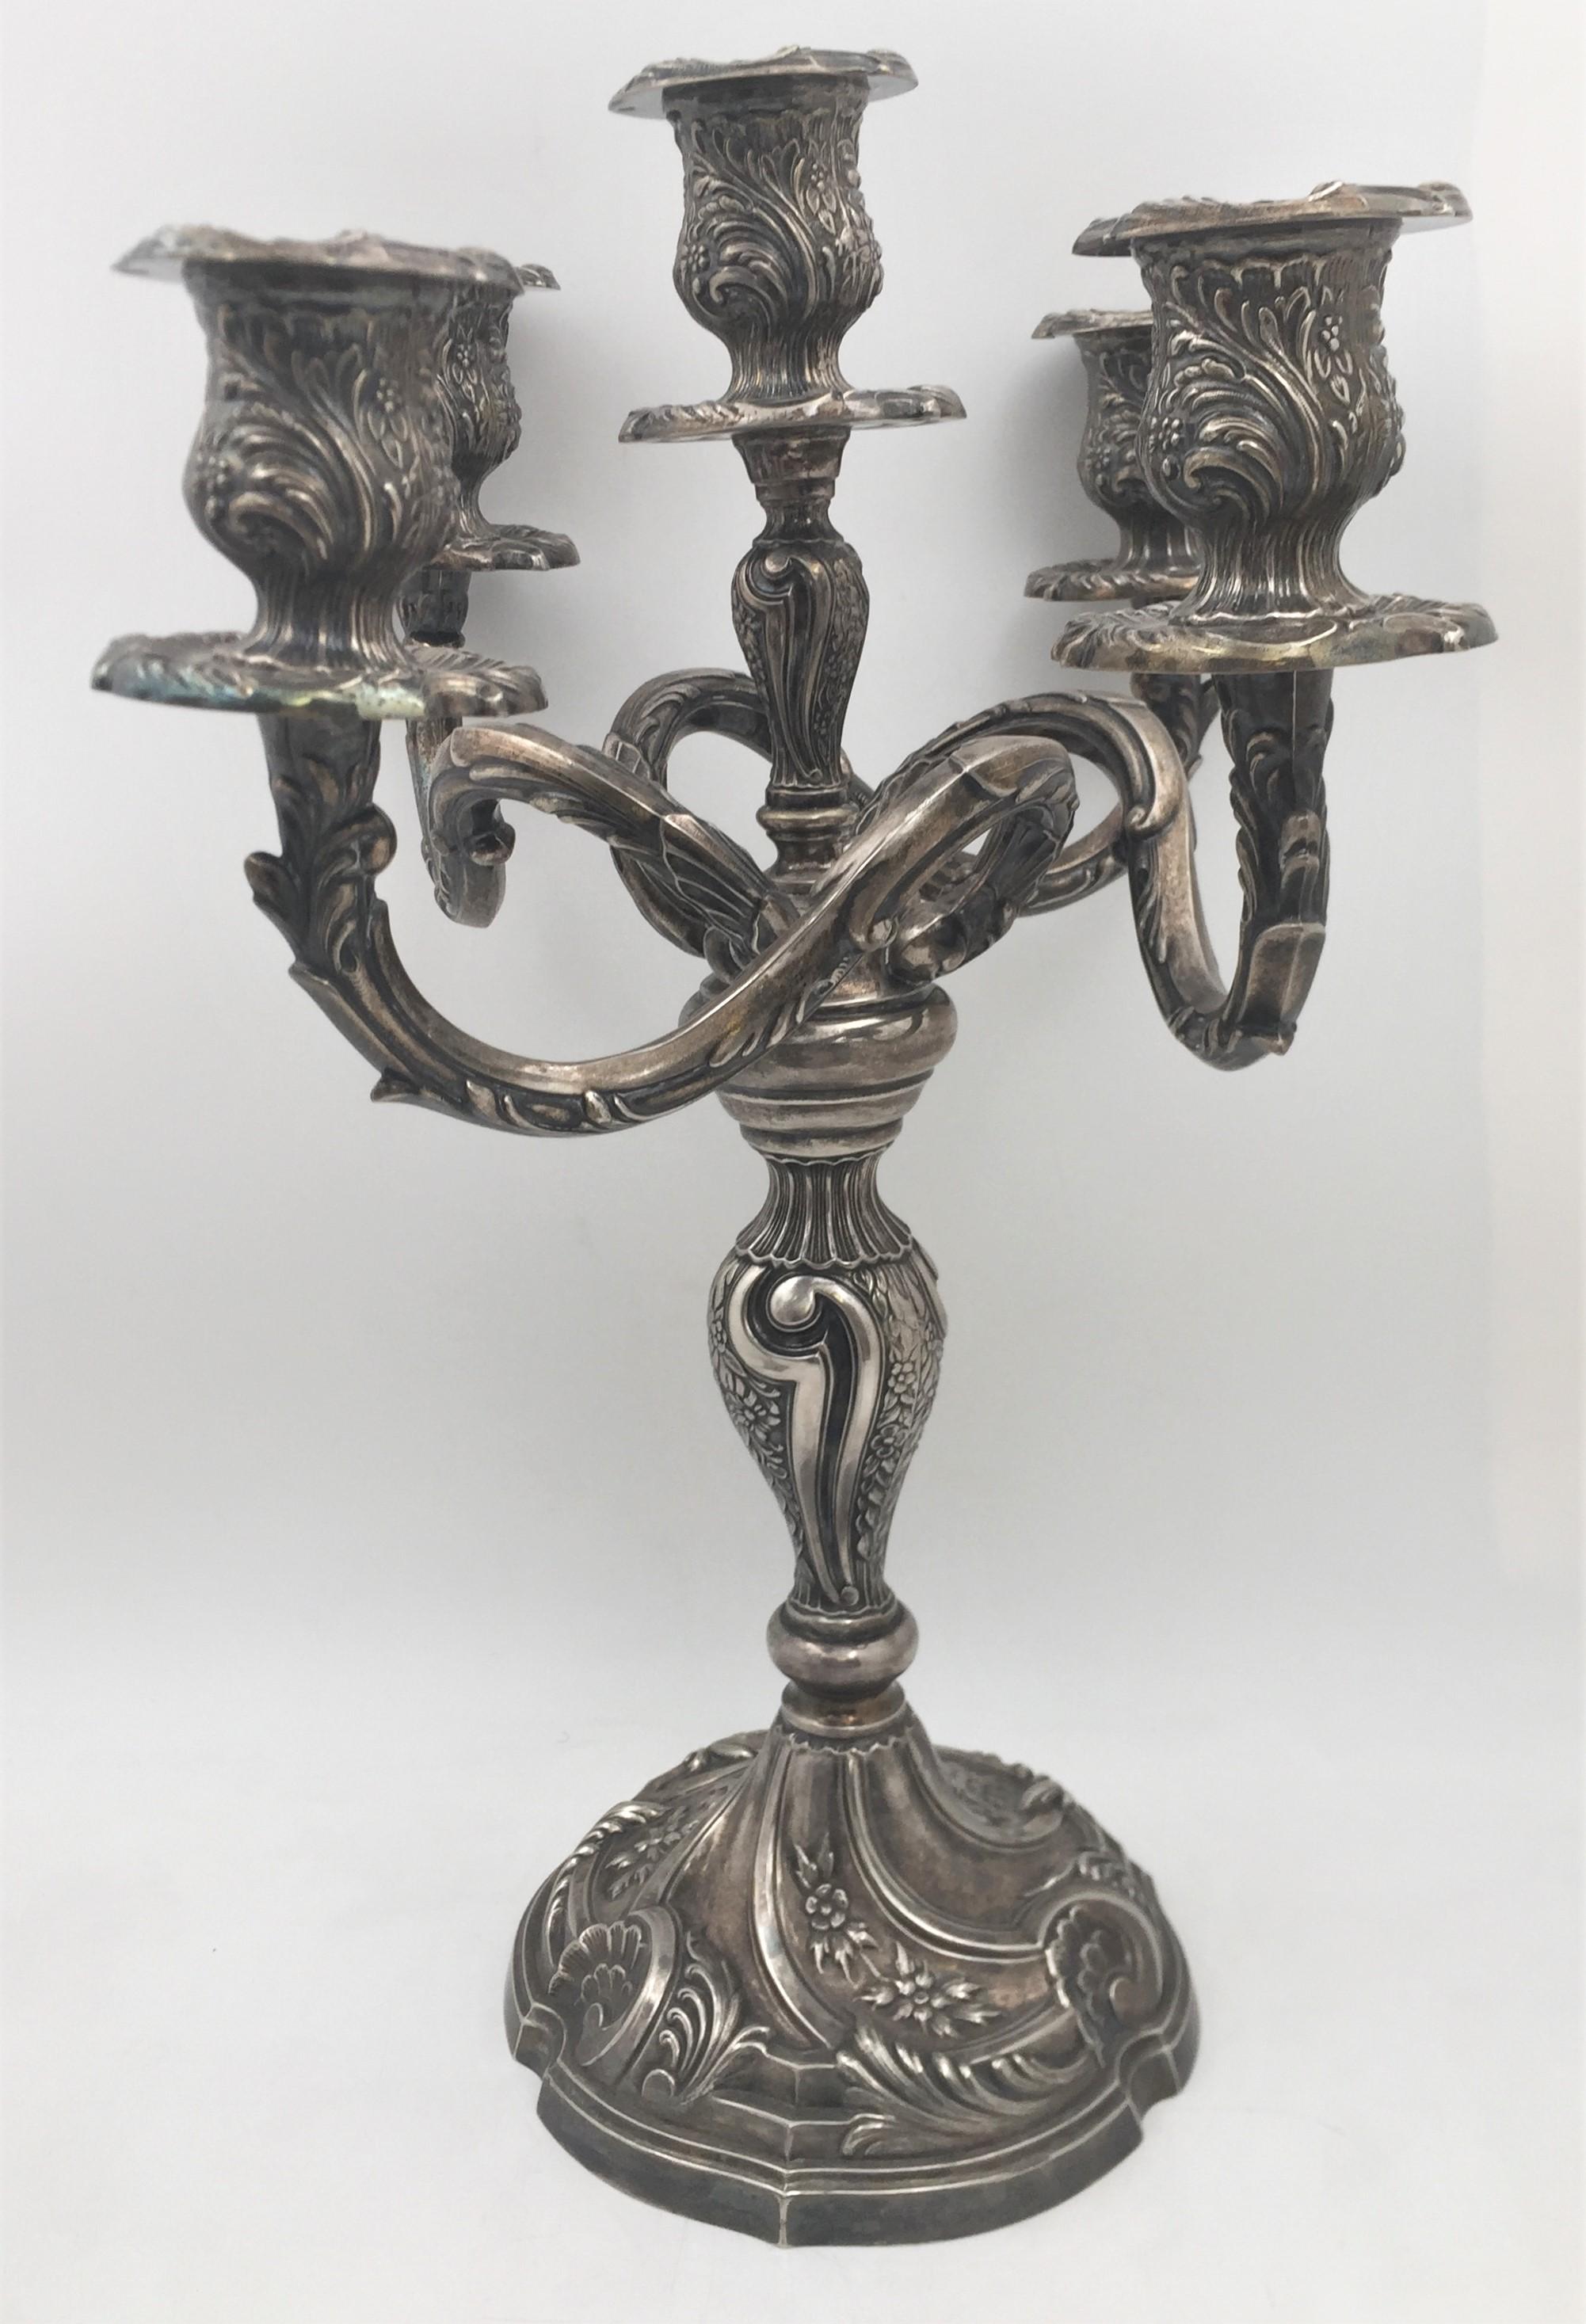 Massive and stunning pair of 5-light silver plate Rococo style candelabra from the late 19th century. Each measures 18 inches high and 14 inches wide, from arm to arm and bears hallmarks as shown.

